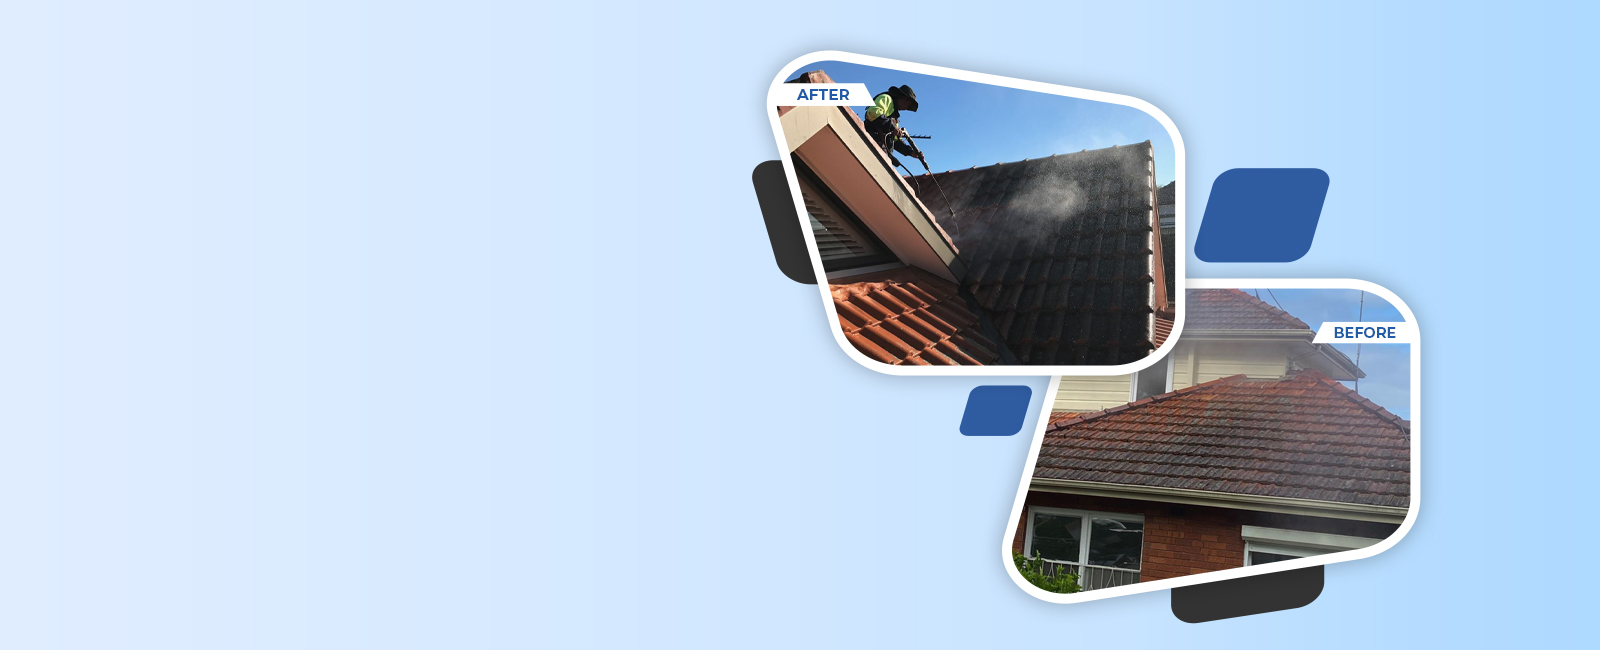 Why Do You Need Roof Painting and Restorations